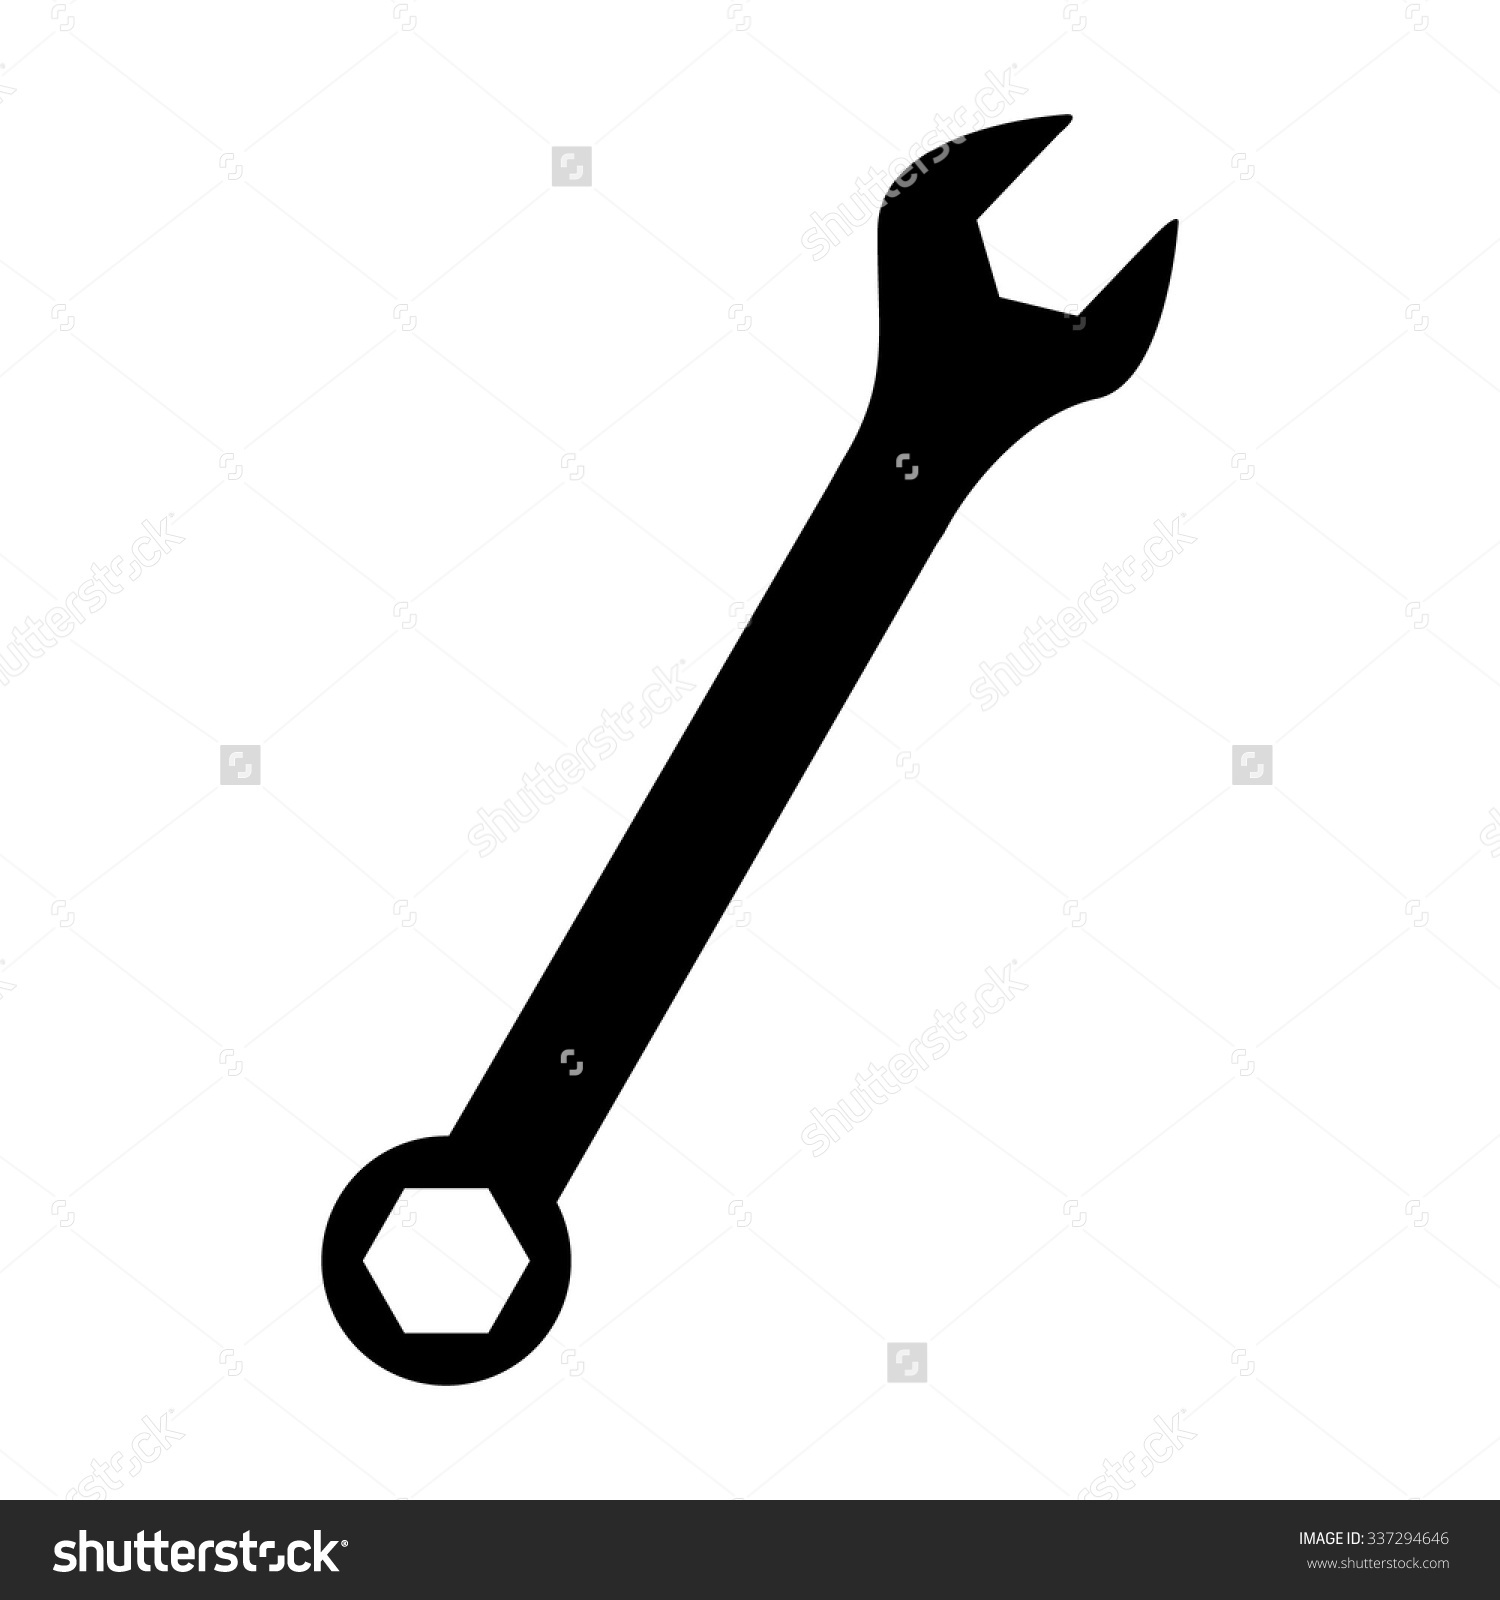 vector wrench